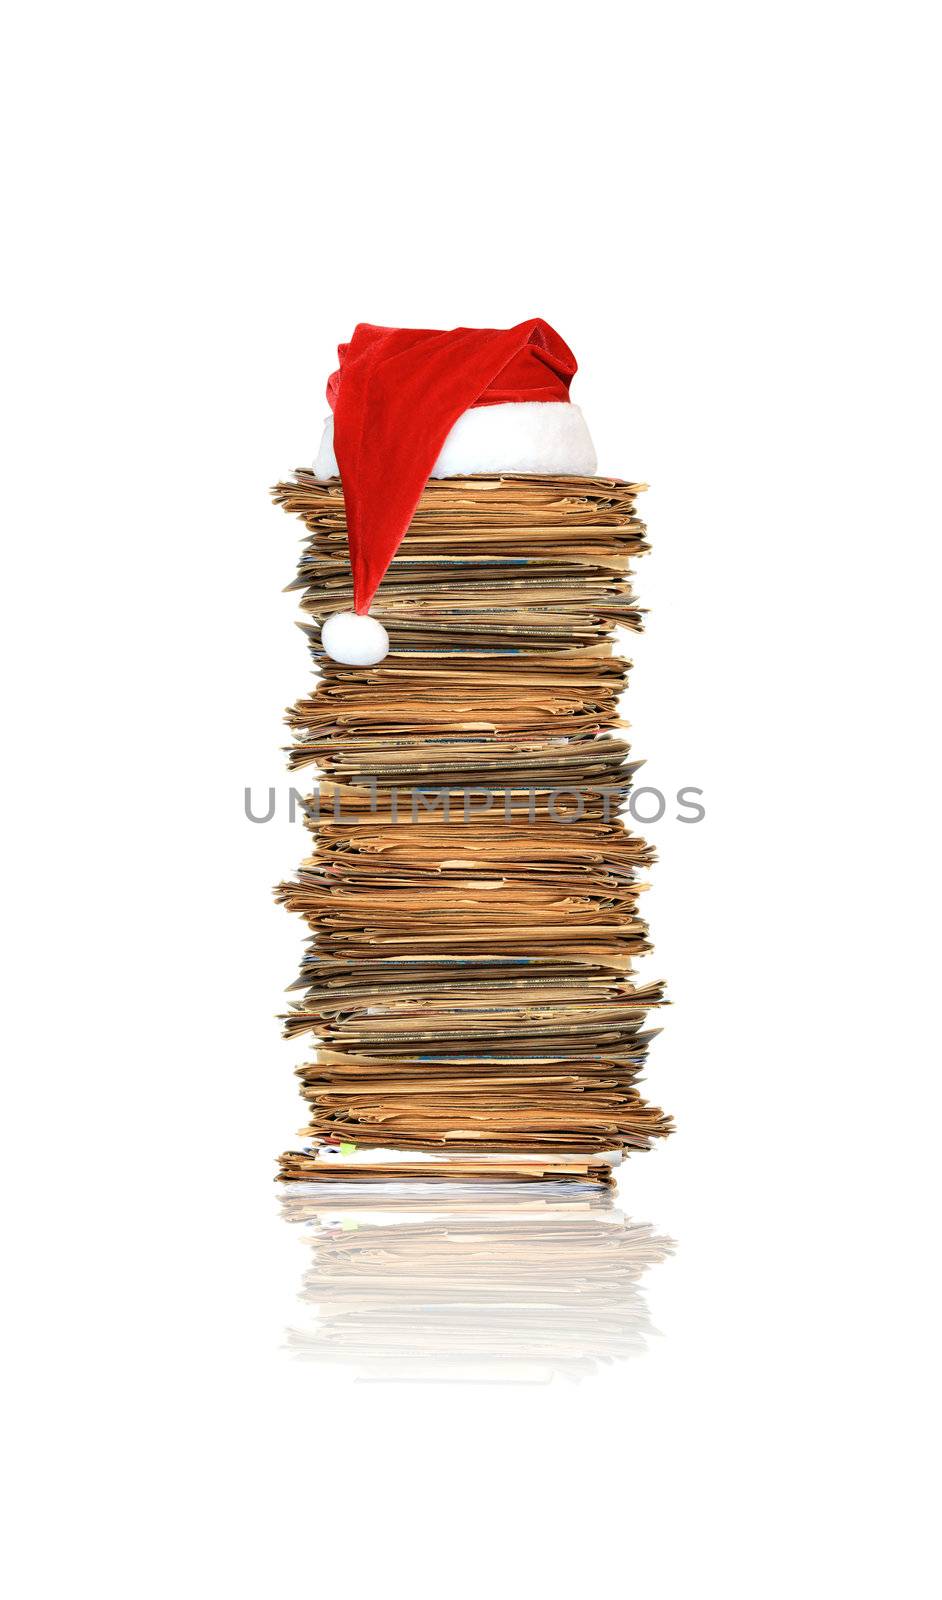 Heap of papers, christmas gift